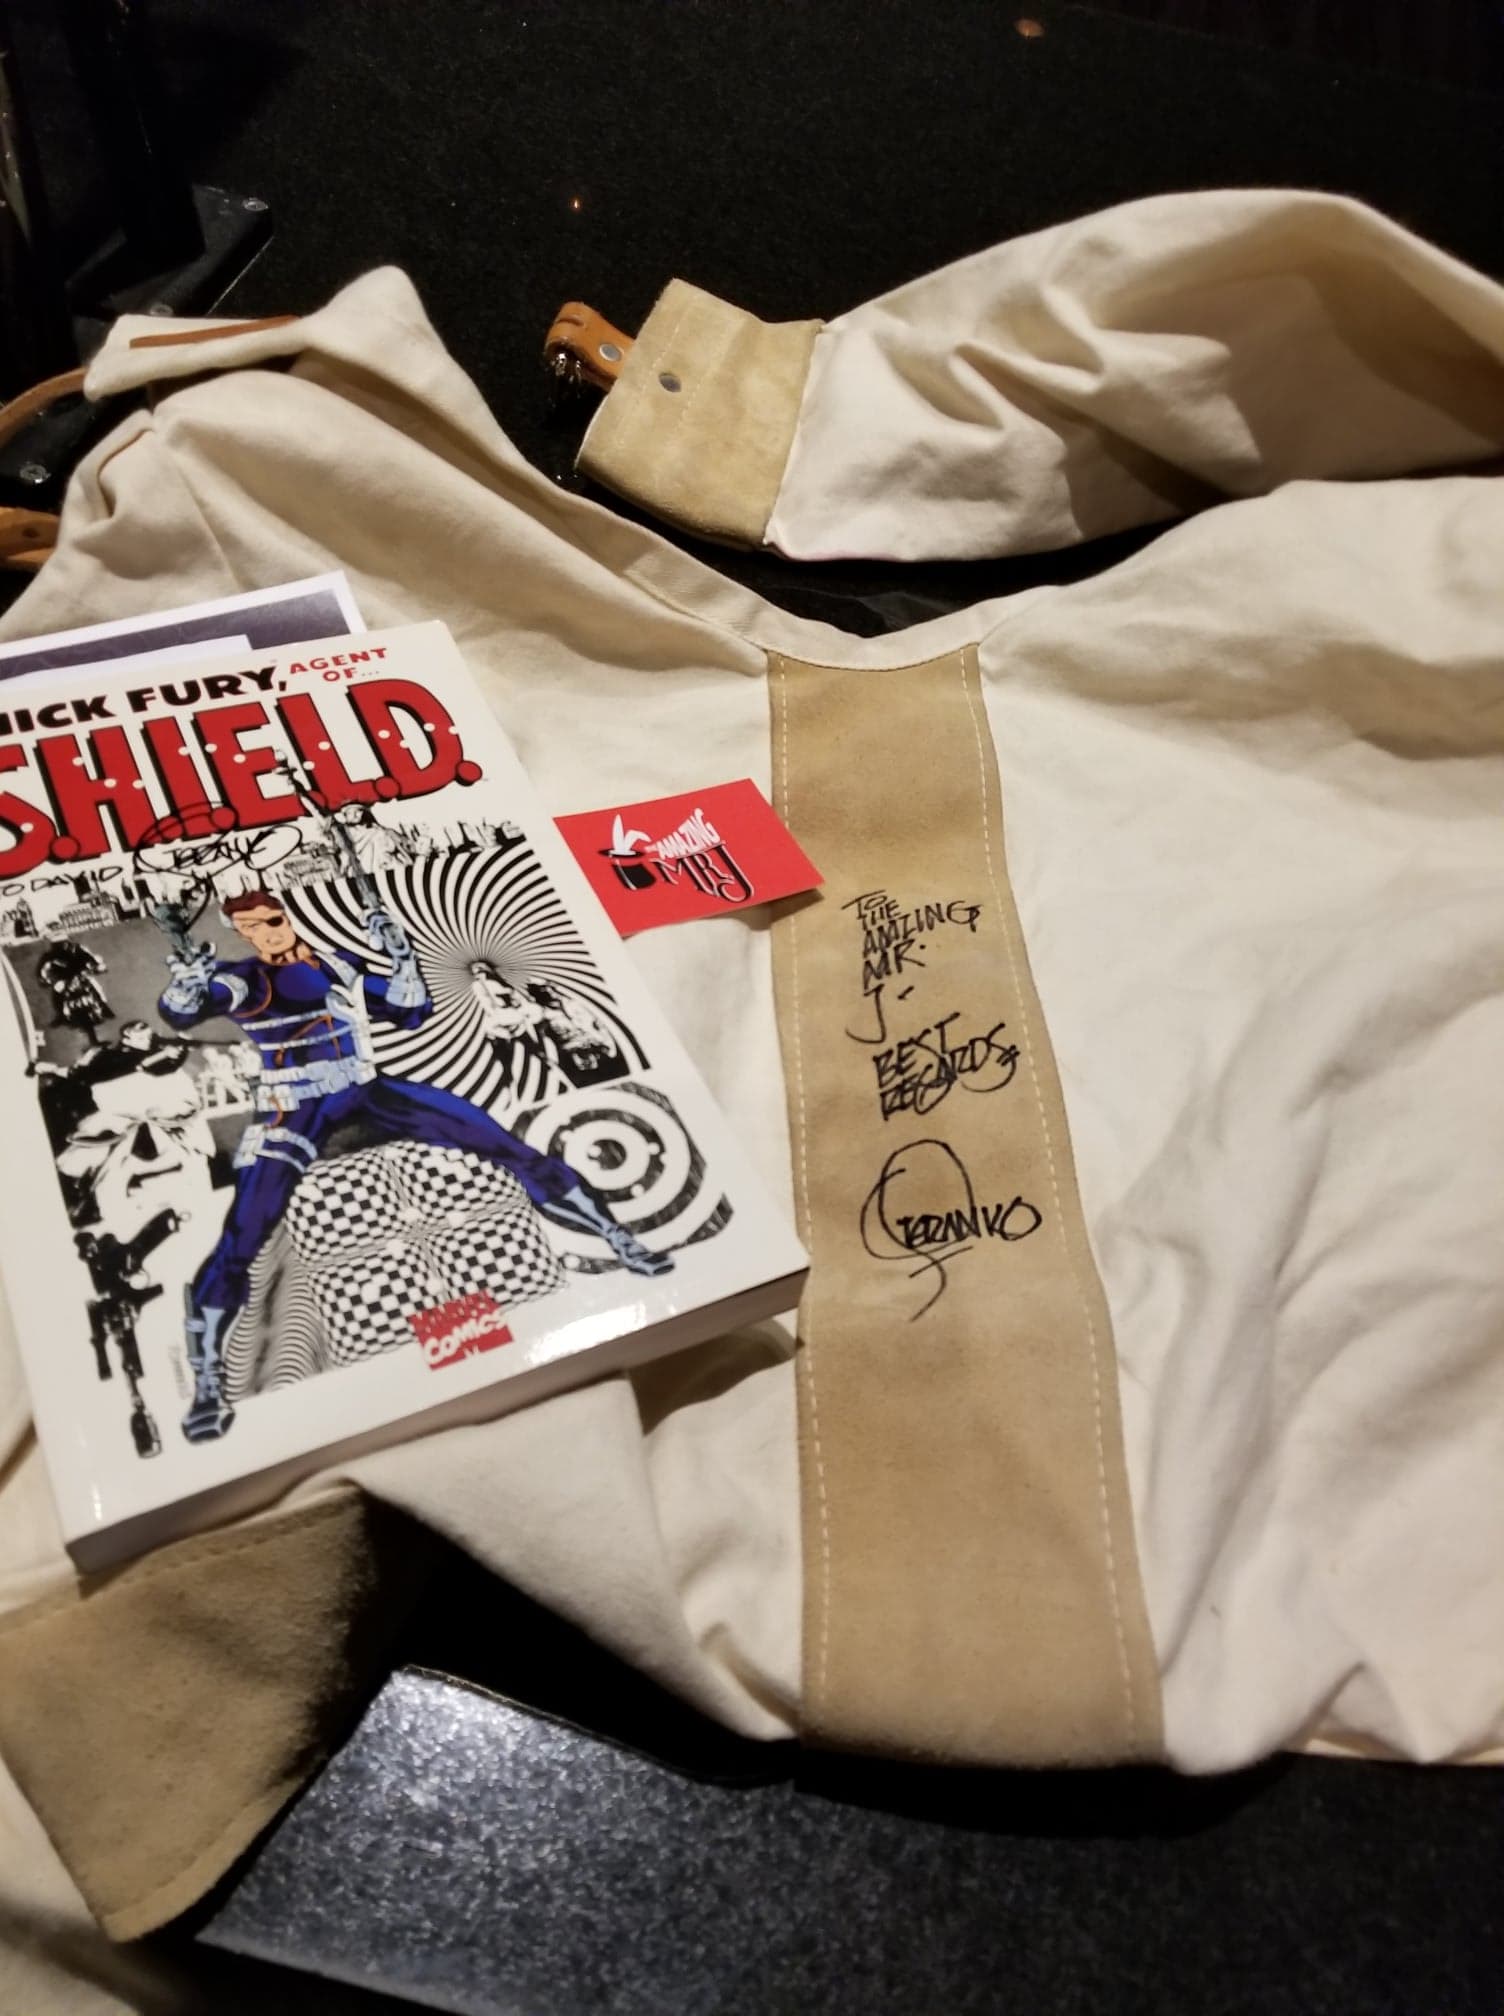 Jim Steranko (Signed book, and straight jacket!)